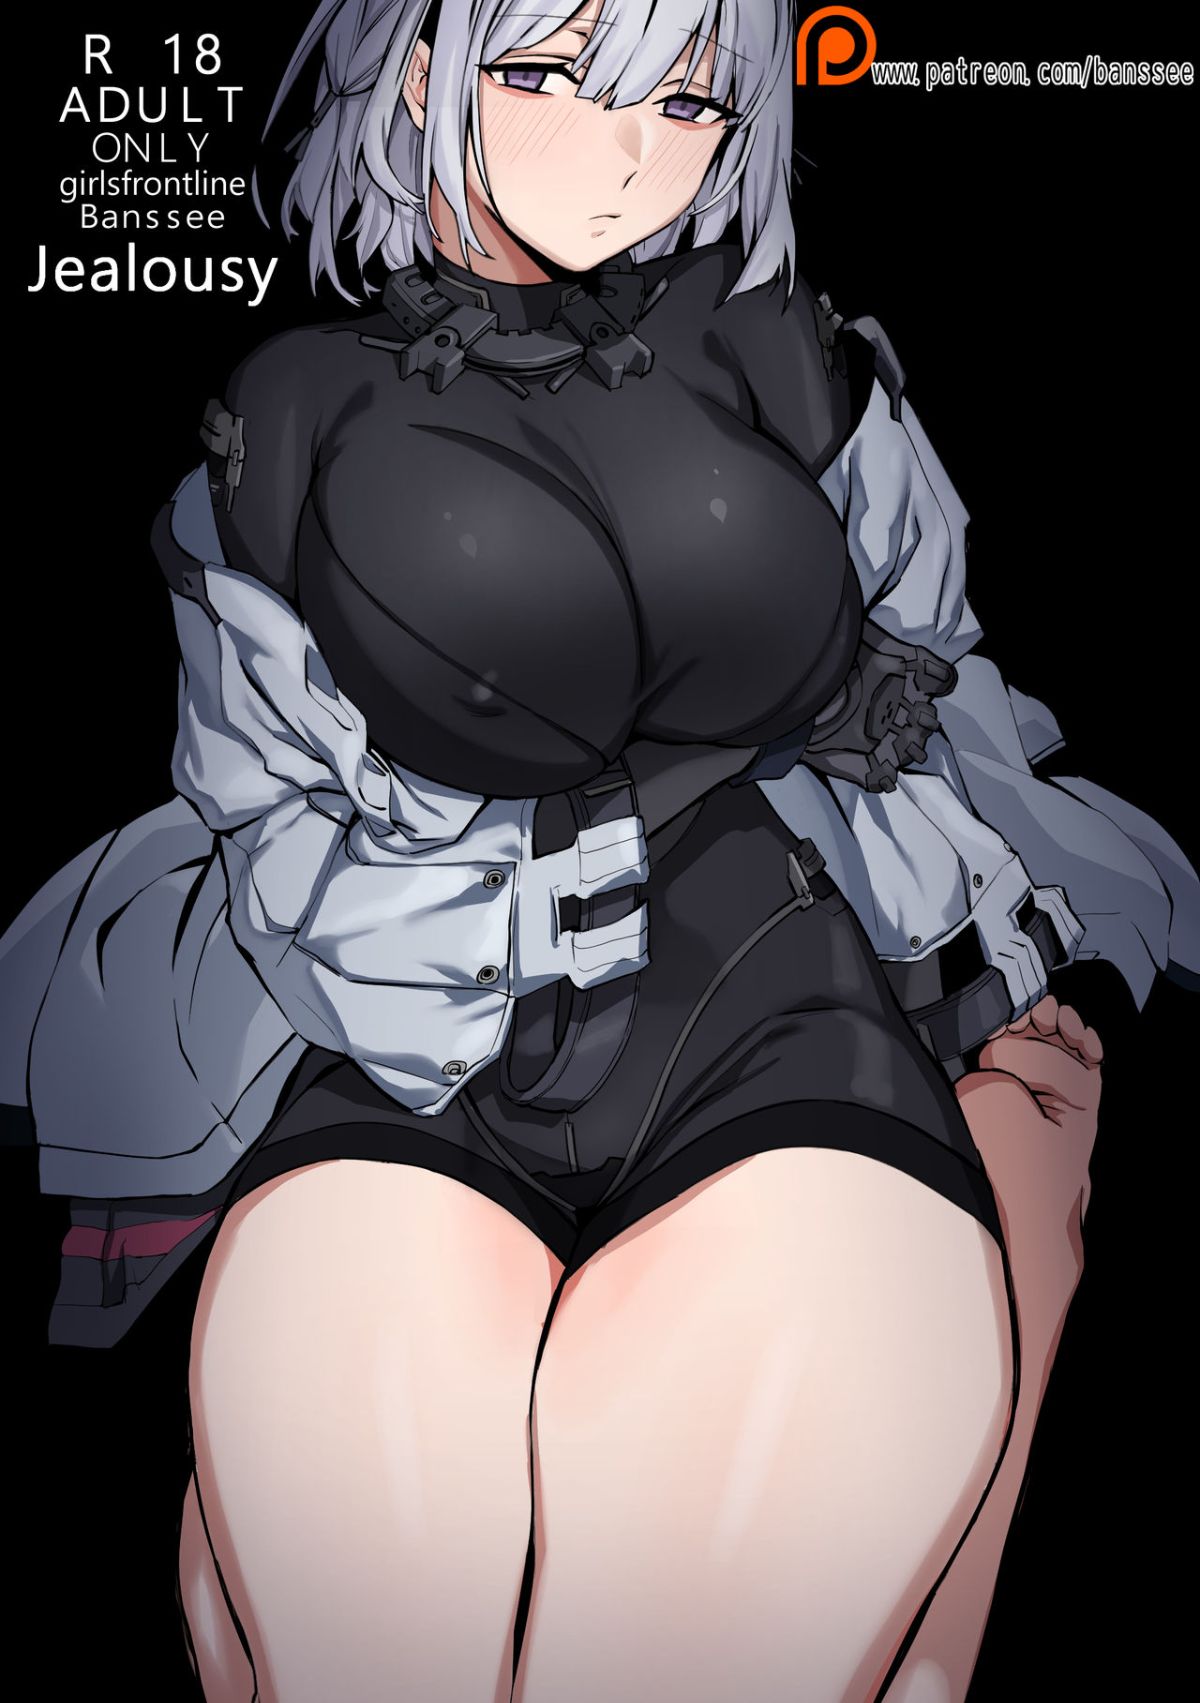 Jealousy by Banssee Hentai english 01